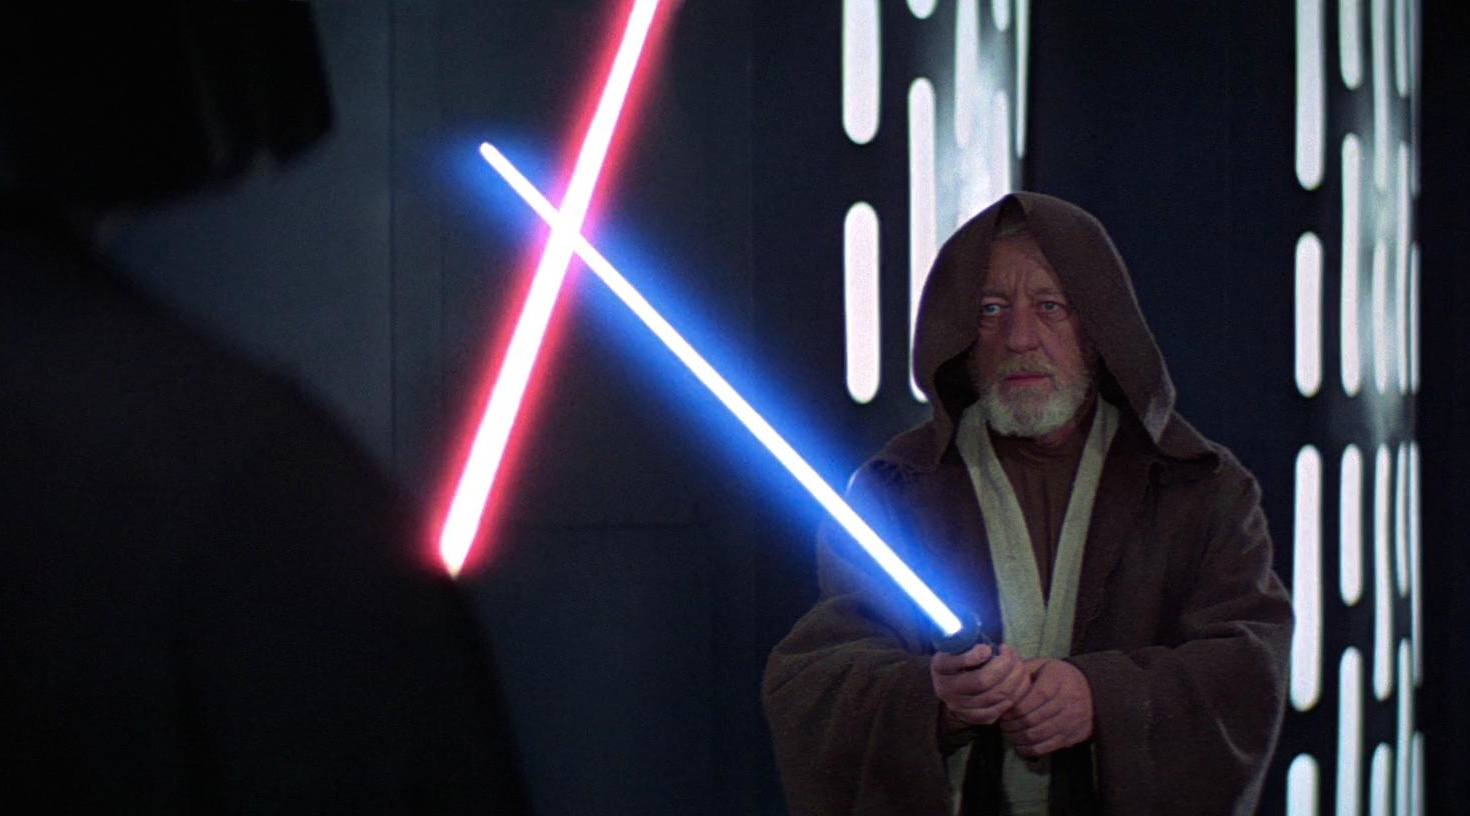 Four decades late, the original Star Wars trilogy makes its China debut